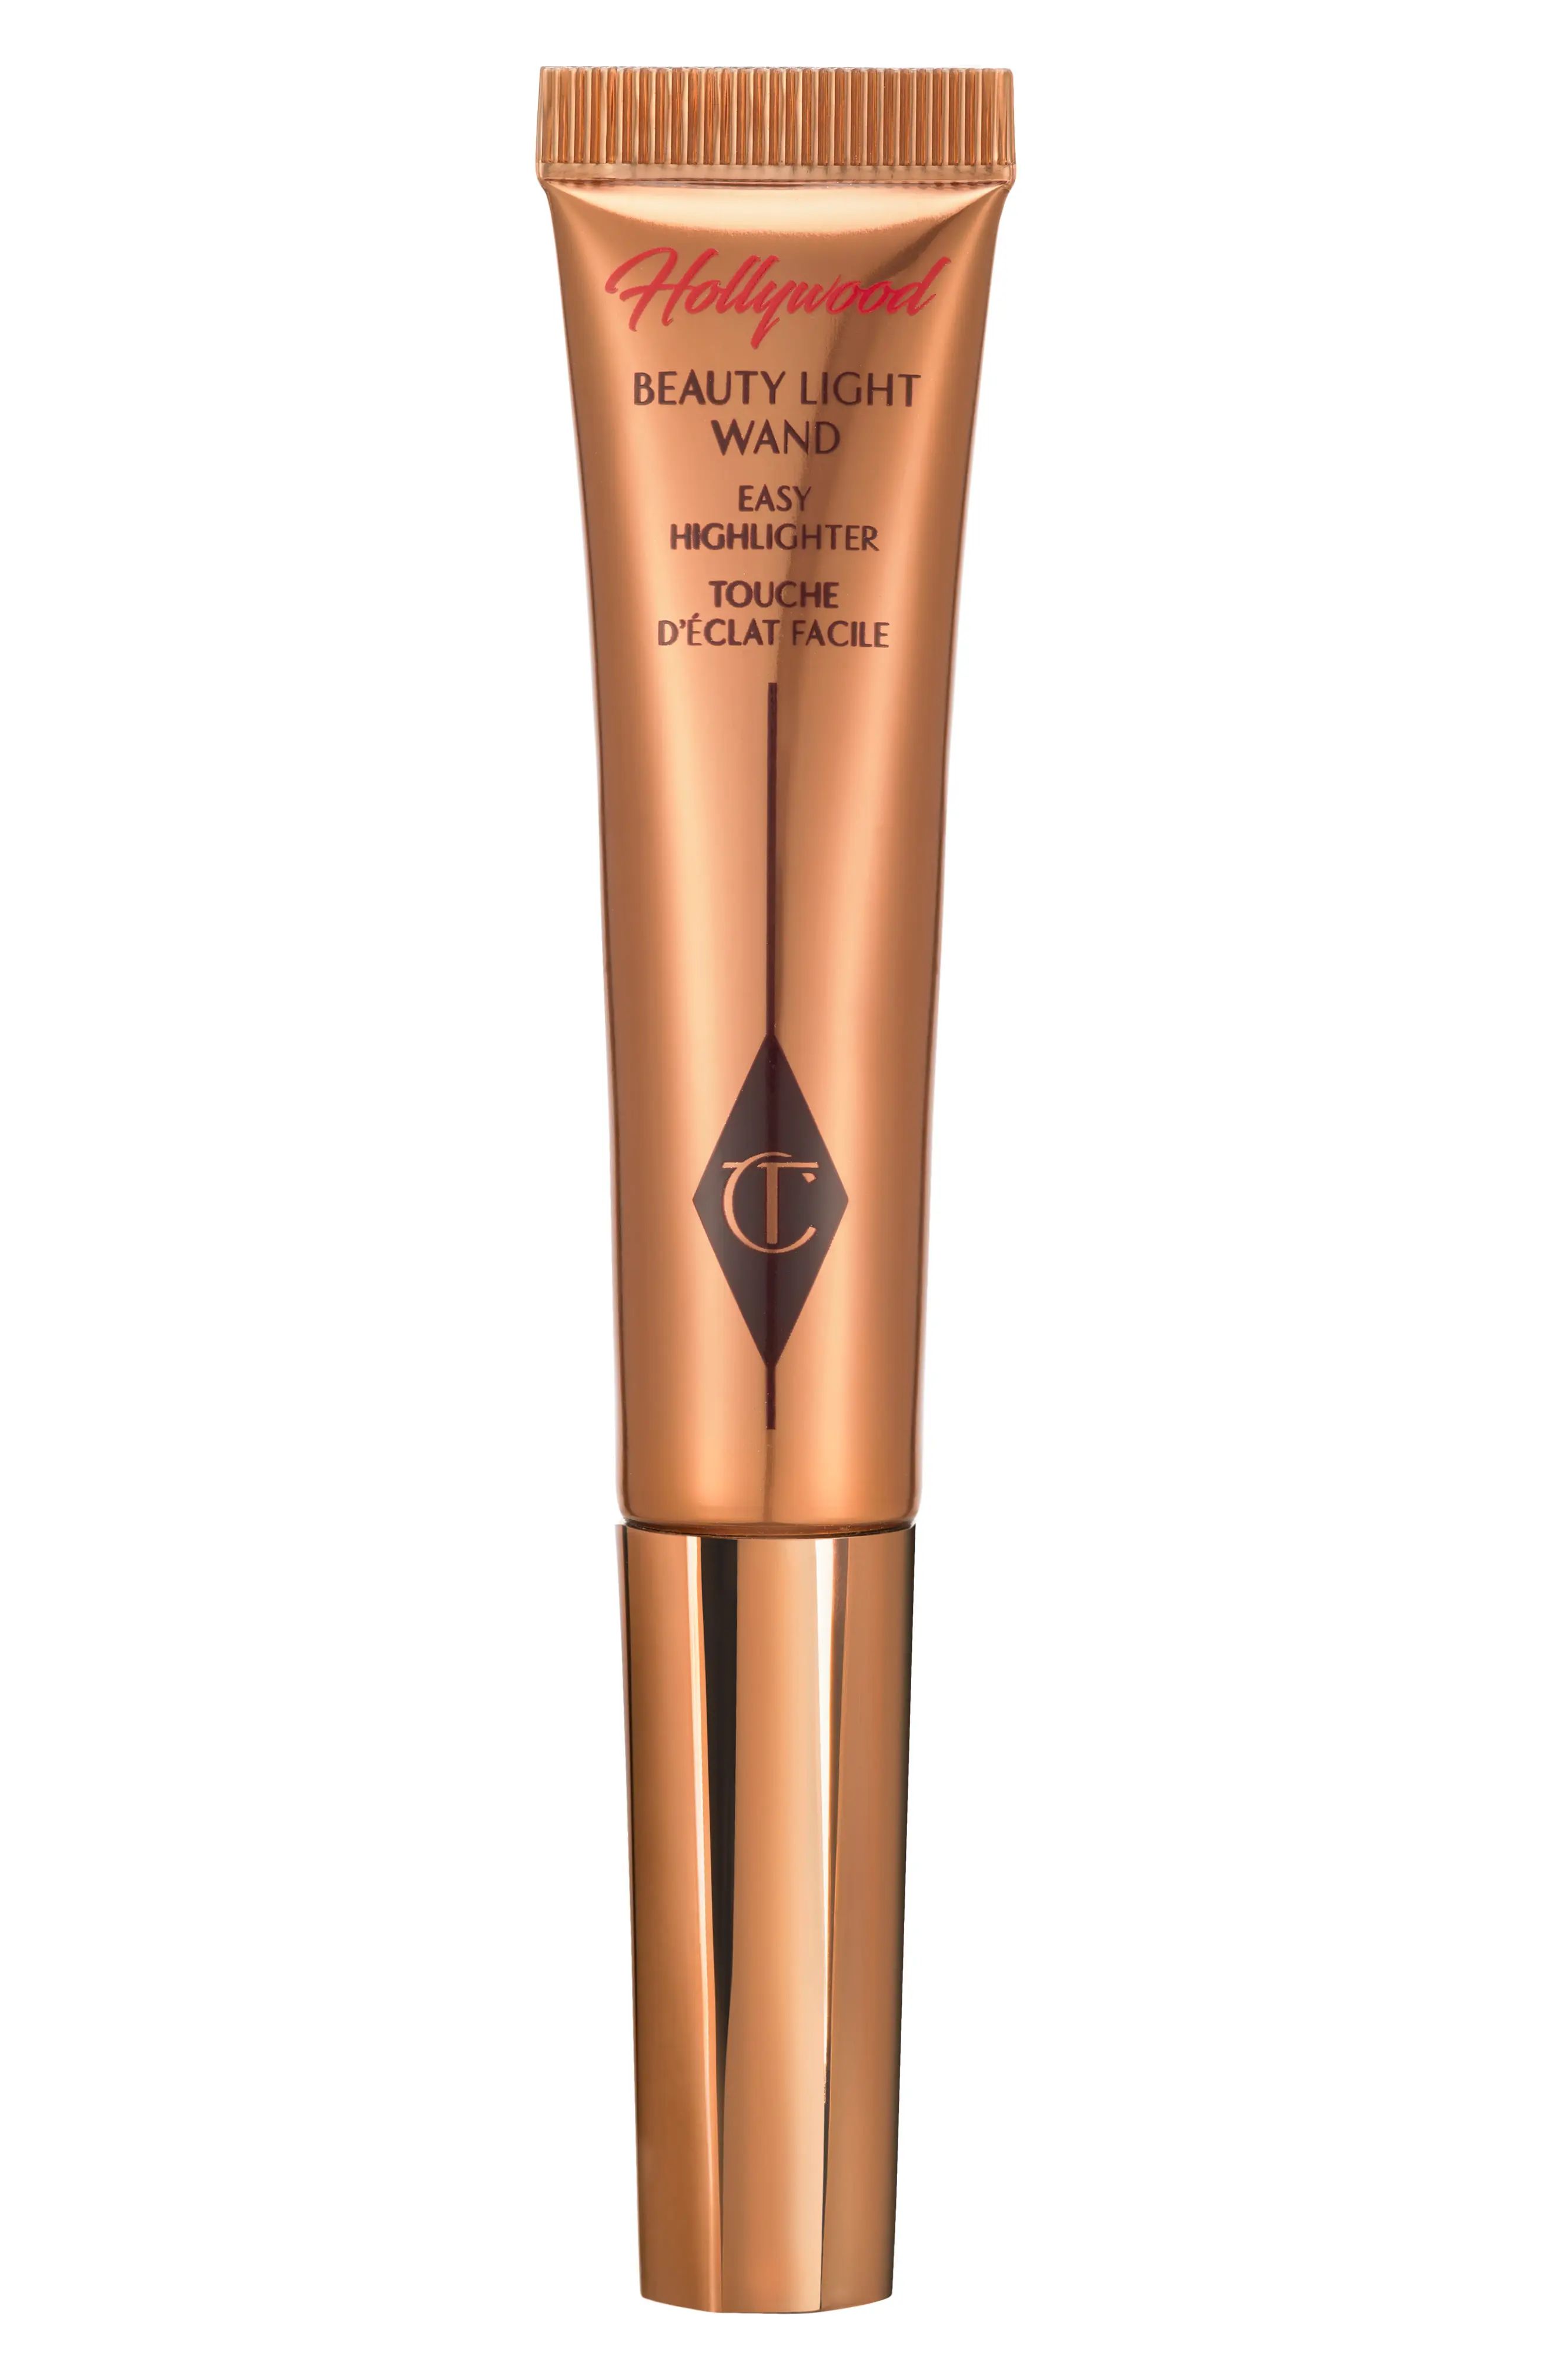 Hollywood Beauty Light Wand | Nordstrom